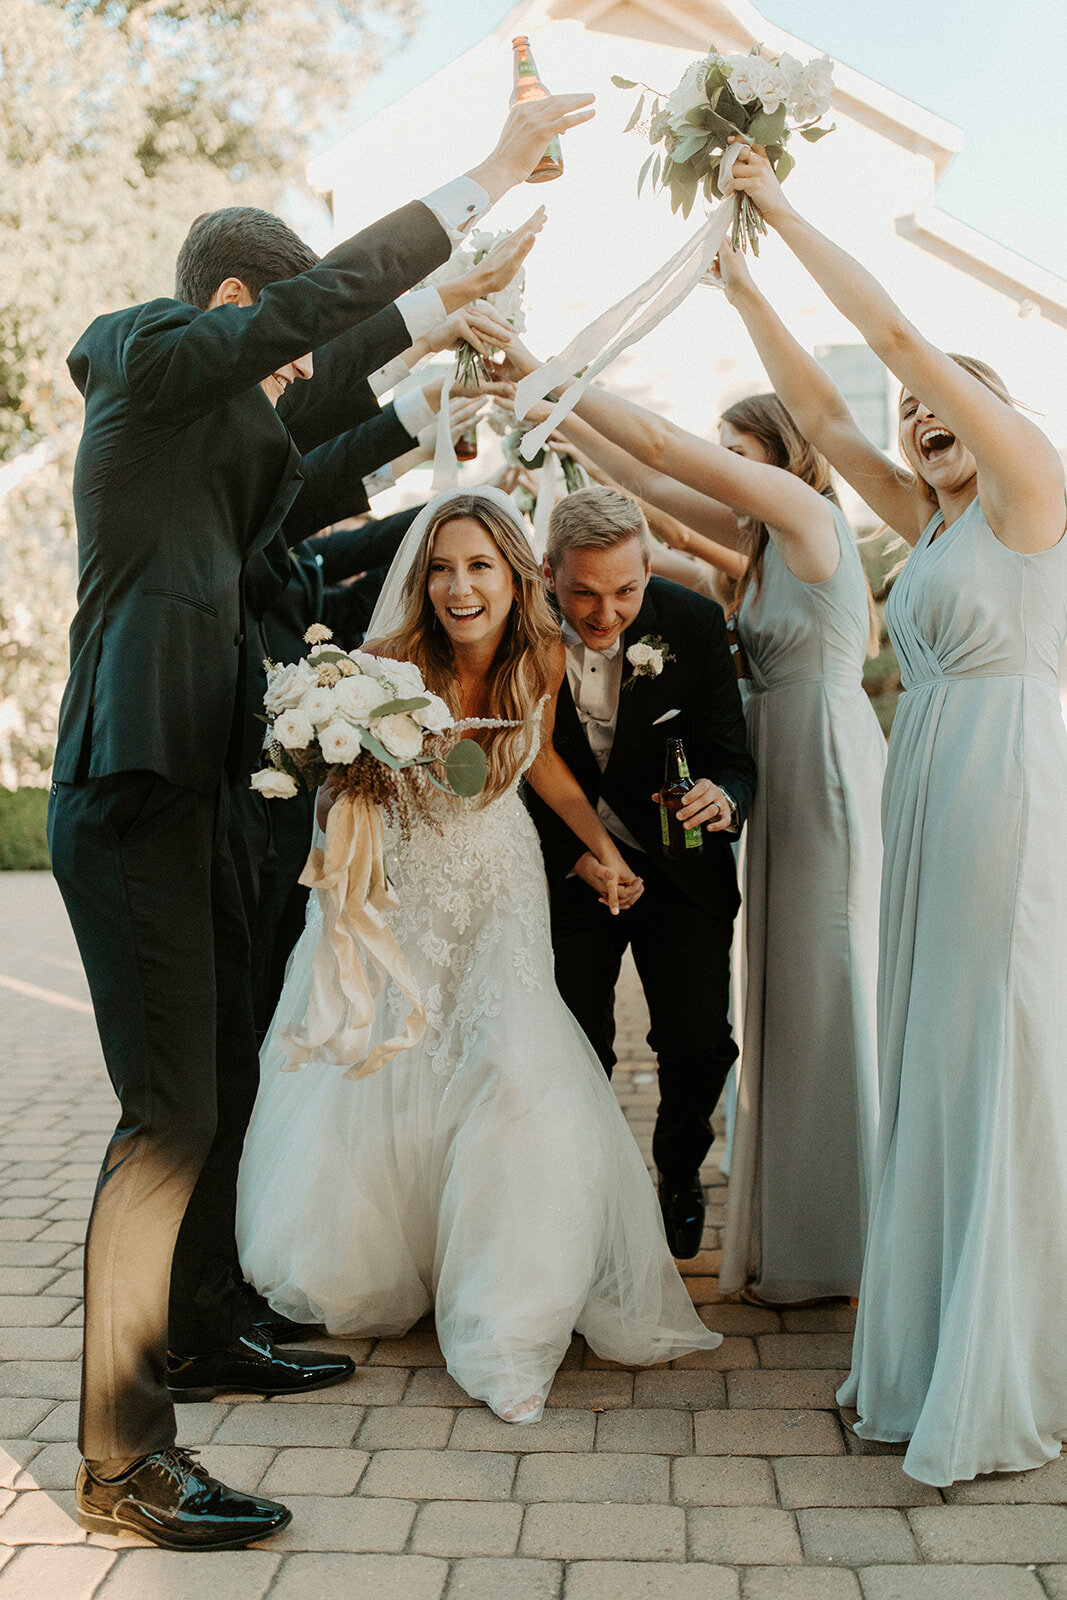 Bride and groom running under hands of bridal party